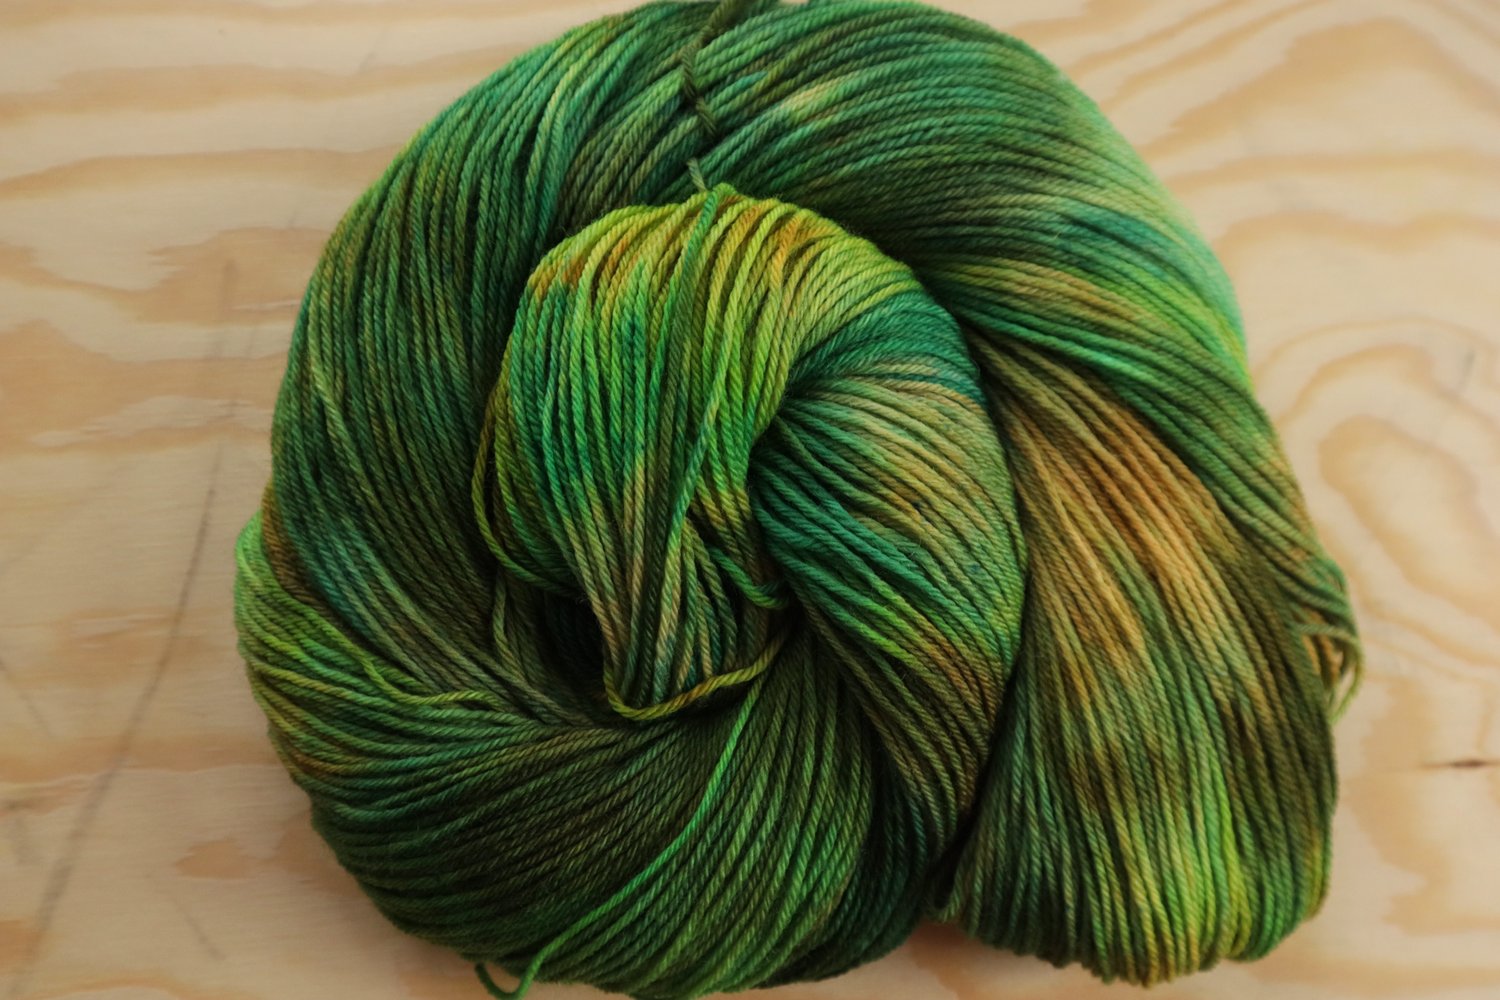 Dyepot Weekly #361 - Dyeing Pastel Tonal Yarn - Layering Color Slowly for  Good Coverage 